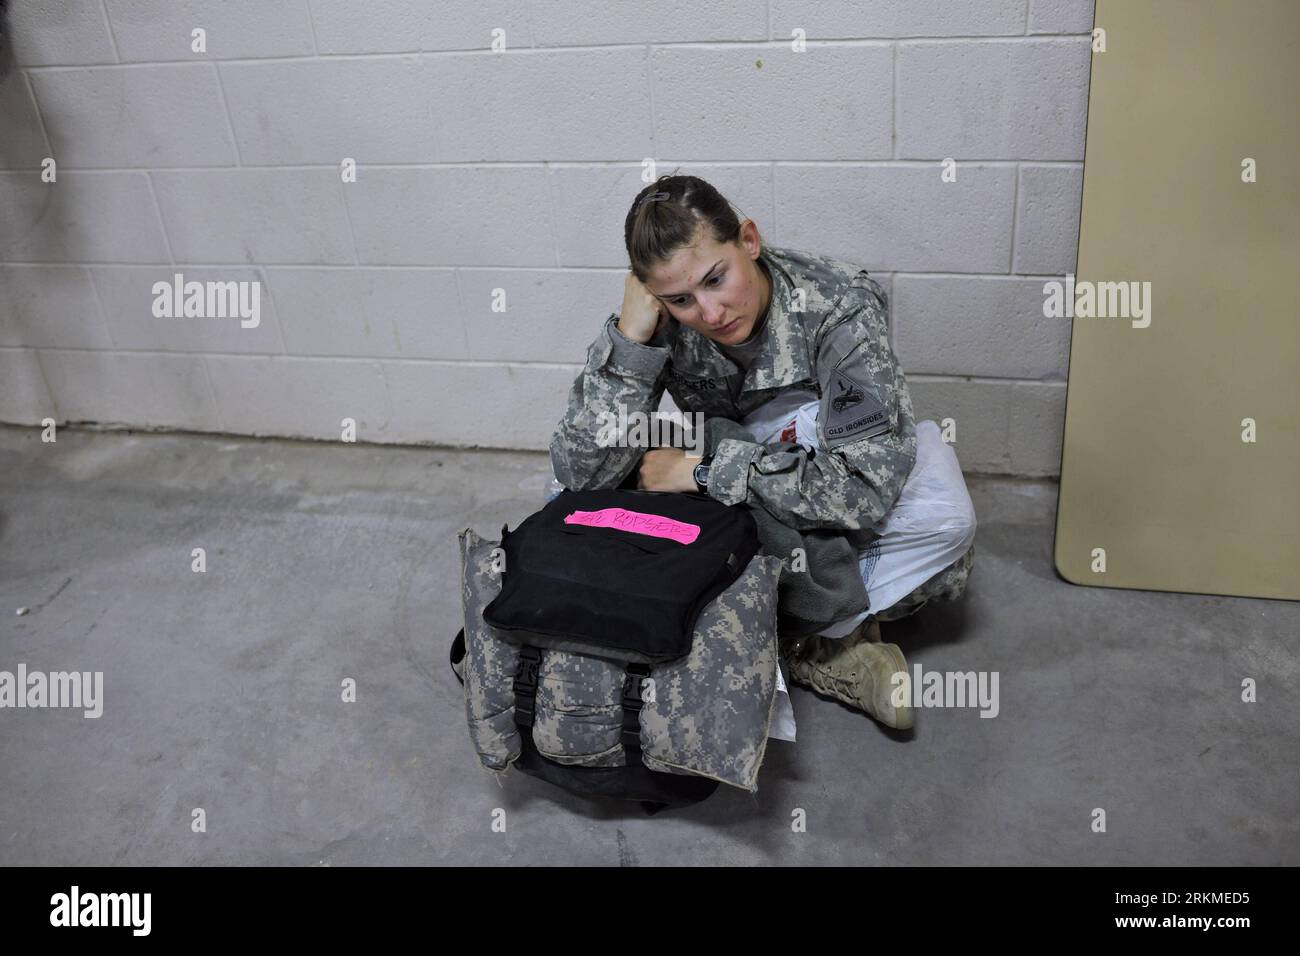 Bildnummer: 56693236  Datum: 12.12.2011  Copyright: imago/Xinhua (111213) -- EL PASO (TEXAS), Dec. 13, 2011 (Xinhua) -- A soldier from 4th Brigade, 1st Armored Division, US Army, rests after arriving at Fort Bliss in El Paso of Texas, the United States, Dec. 12, 2011. Some 270 soldiers of 4th Brigade returned from Iraq and reunited with their family on Monday. U.S. military forces are to pull out completely from Iraq by the end of 2011, according to a security pact, named Status of Forces Agreement (SOFA), signed late in 2008 between Baghdad and Washington. (Xinhua/Zhang Jun)(zcc) U.S.-EL PASO Stock Photo